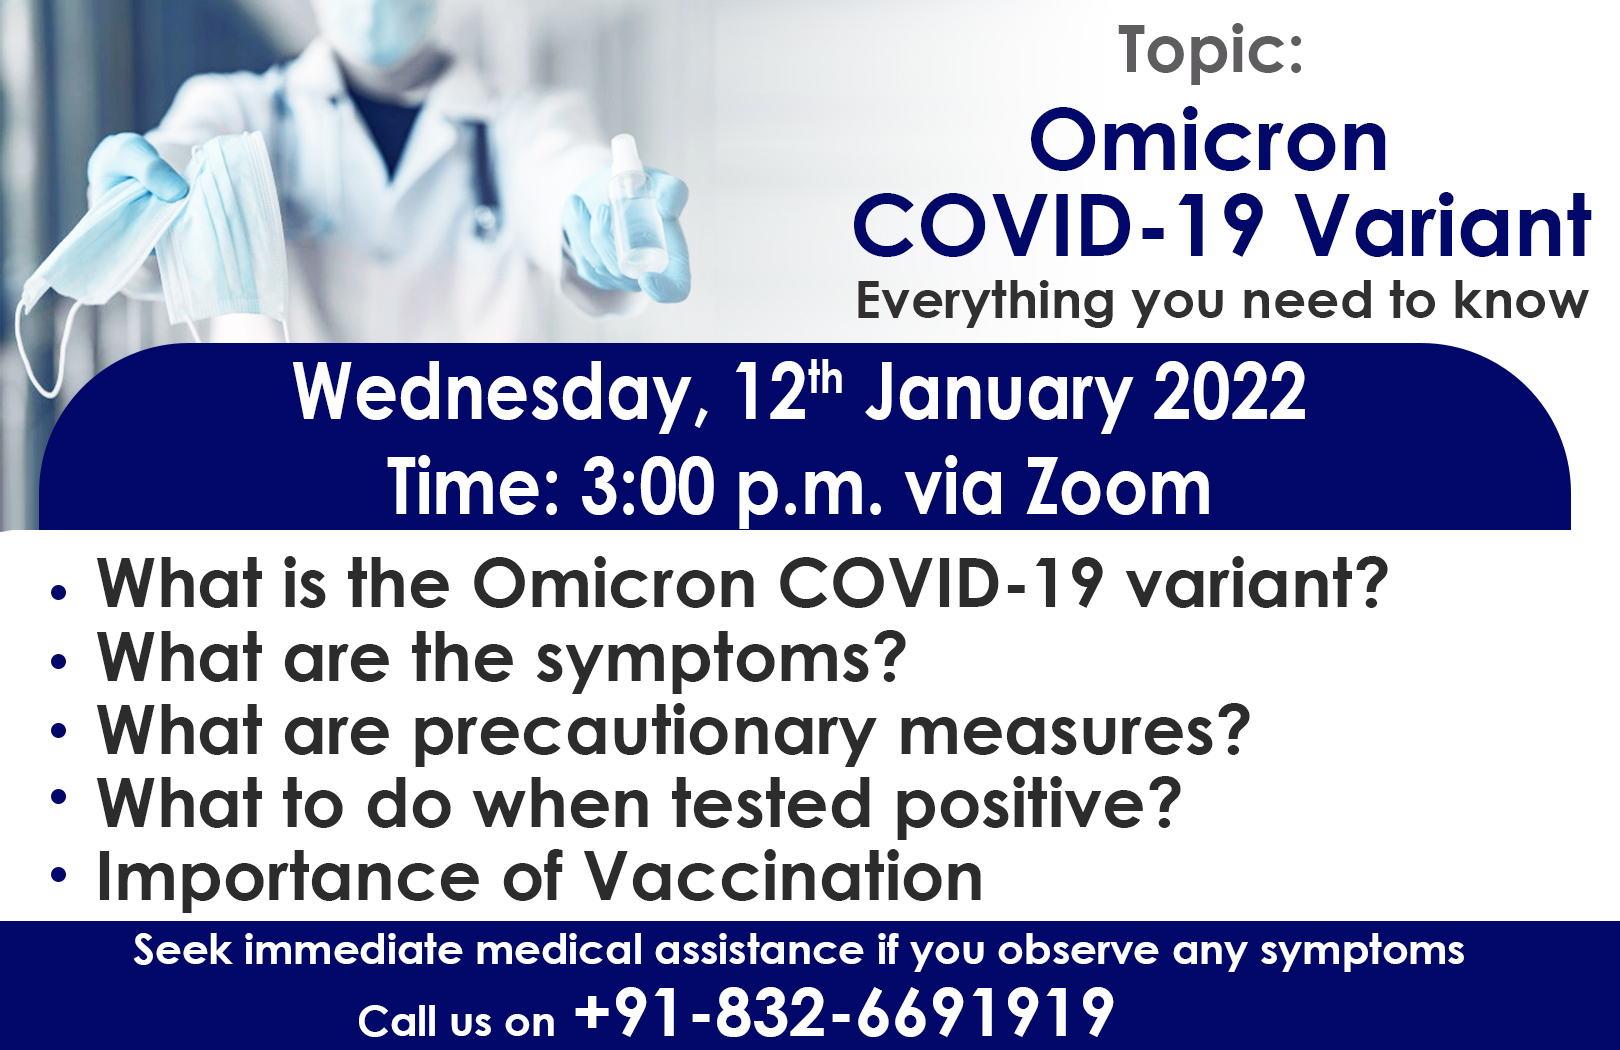 'Omicron COVID-19 Variant: Everything you need to know' By Dr. Susheel Bindroo